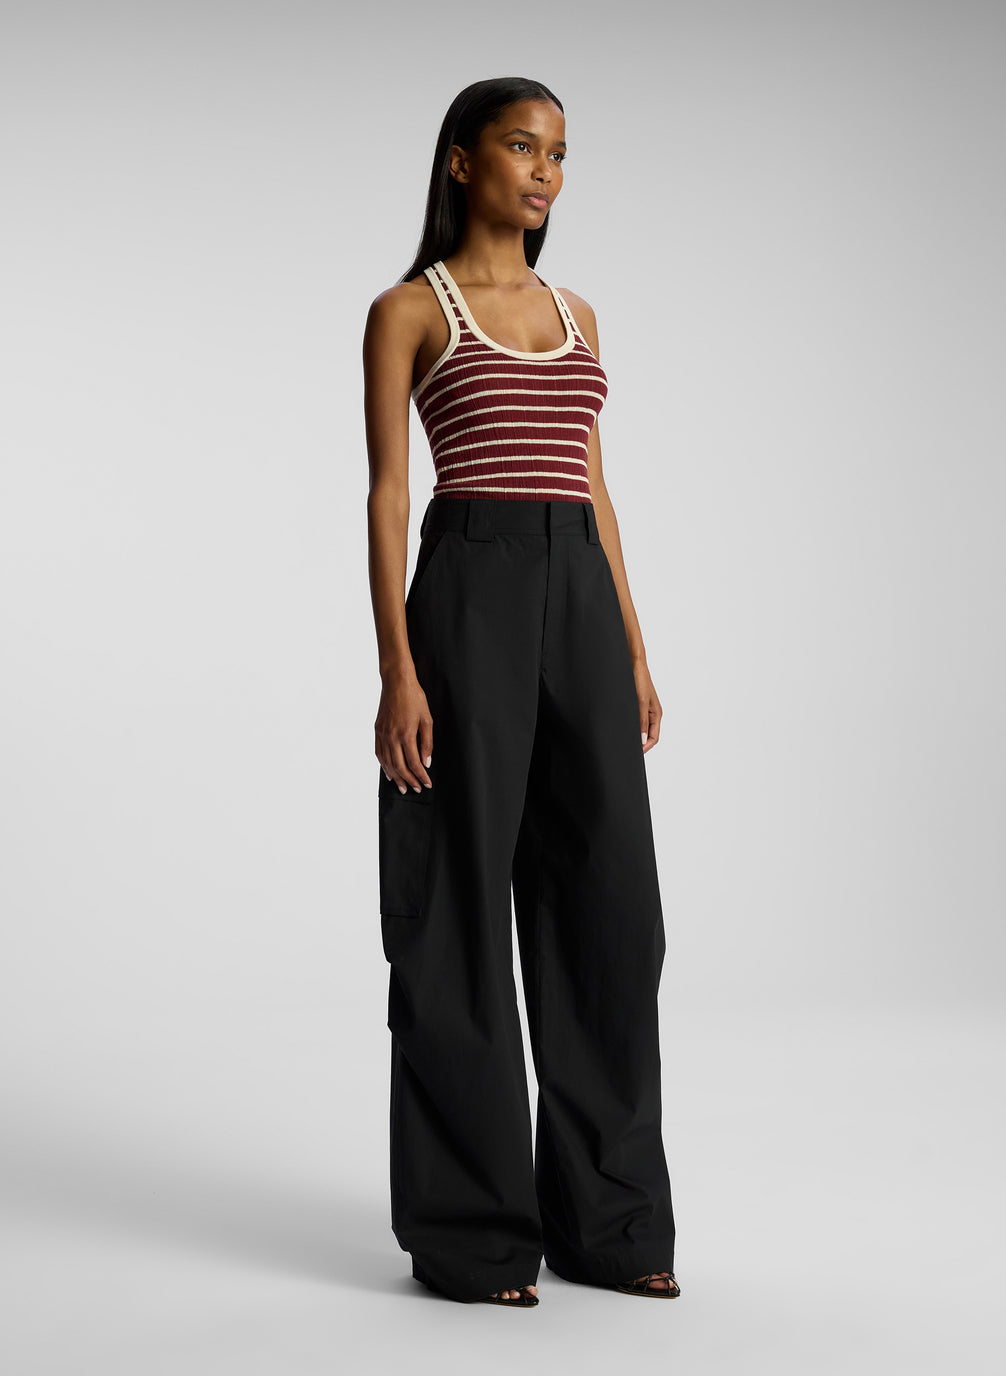 side view of woman wearing burgundy striped tank top and black cargo pants